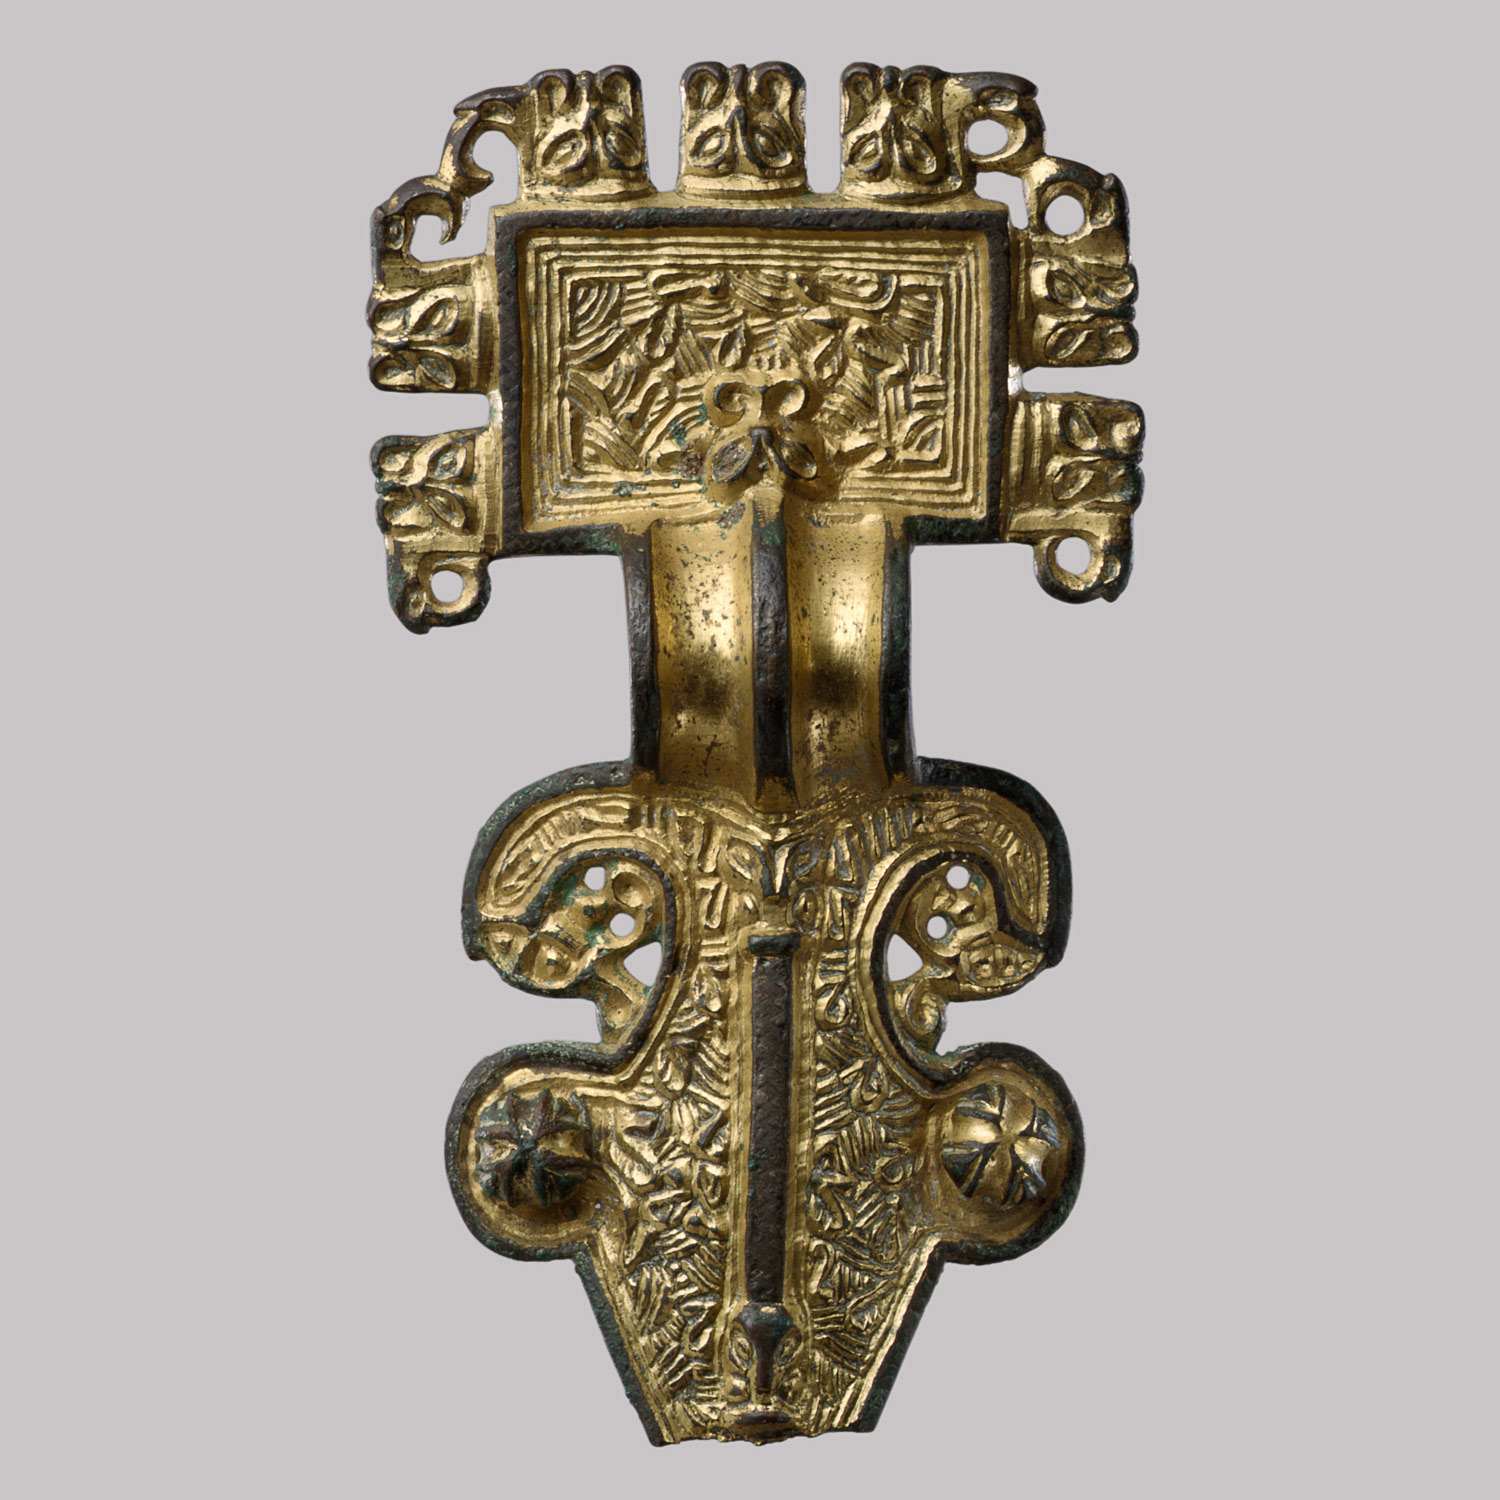 Square-Headed Bow Brooch